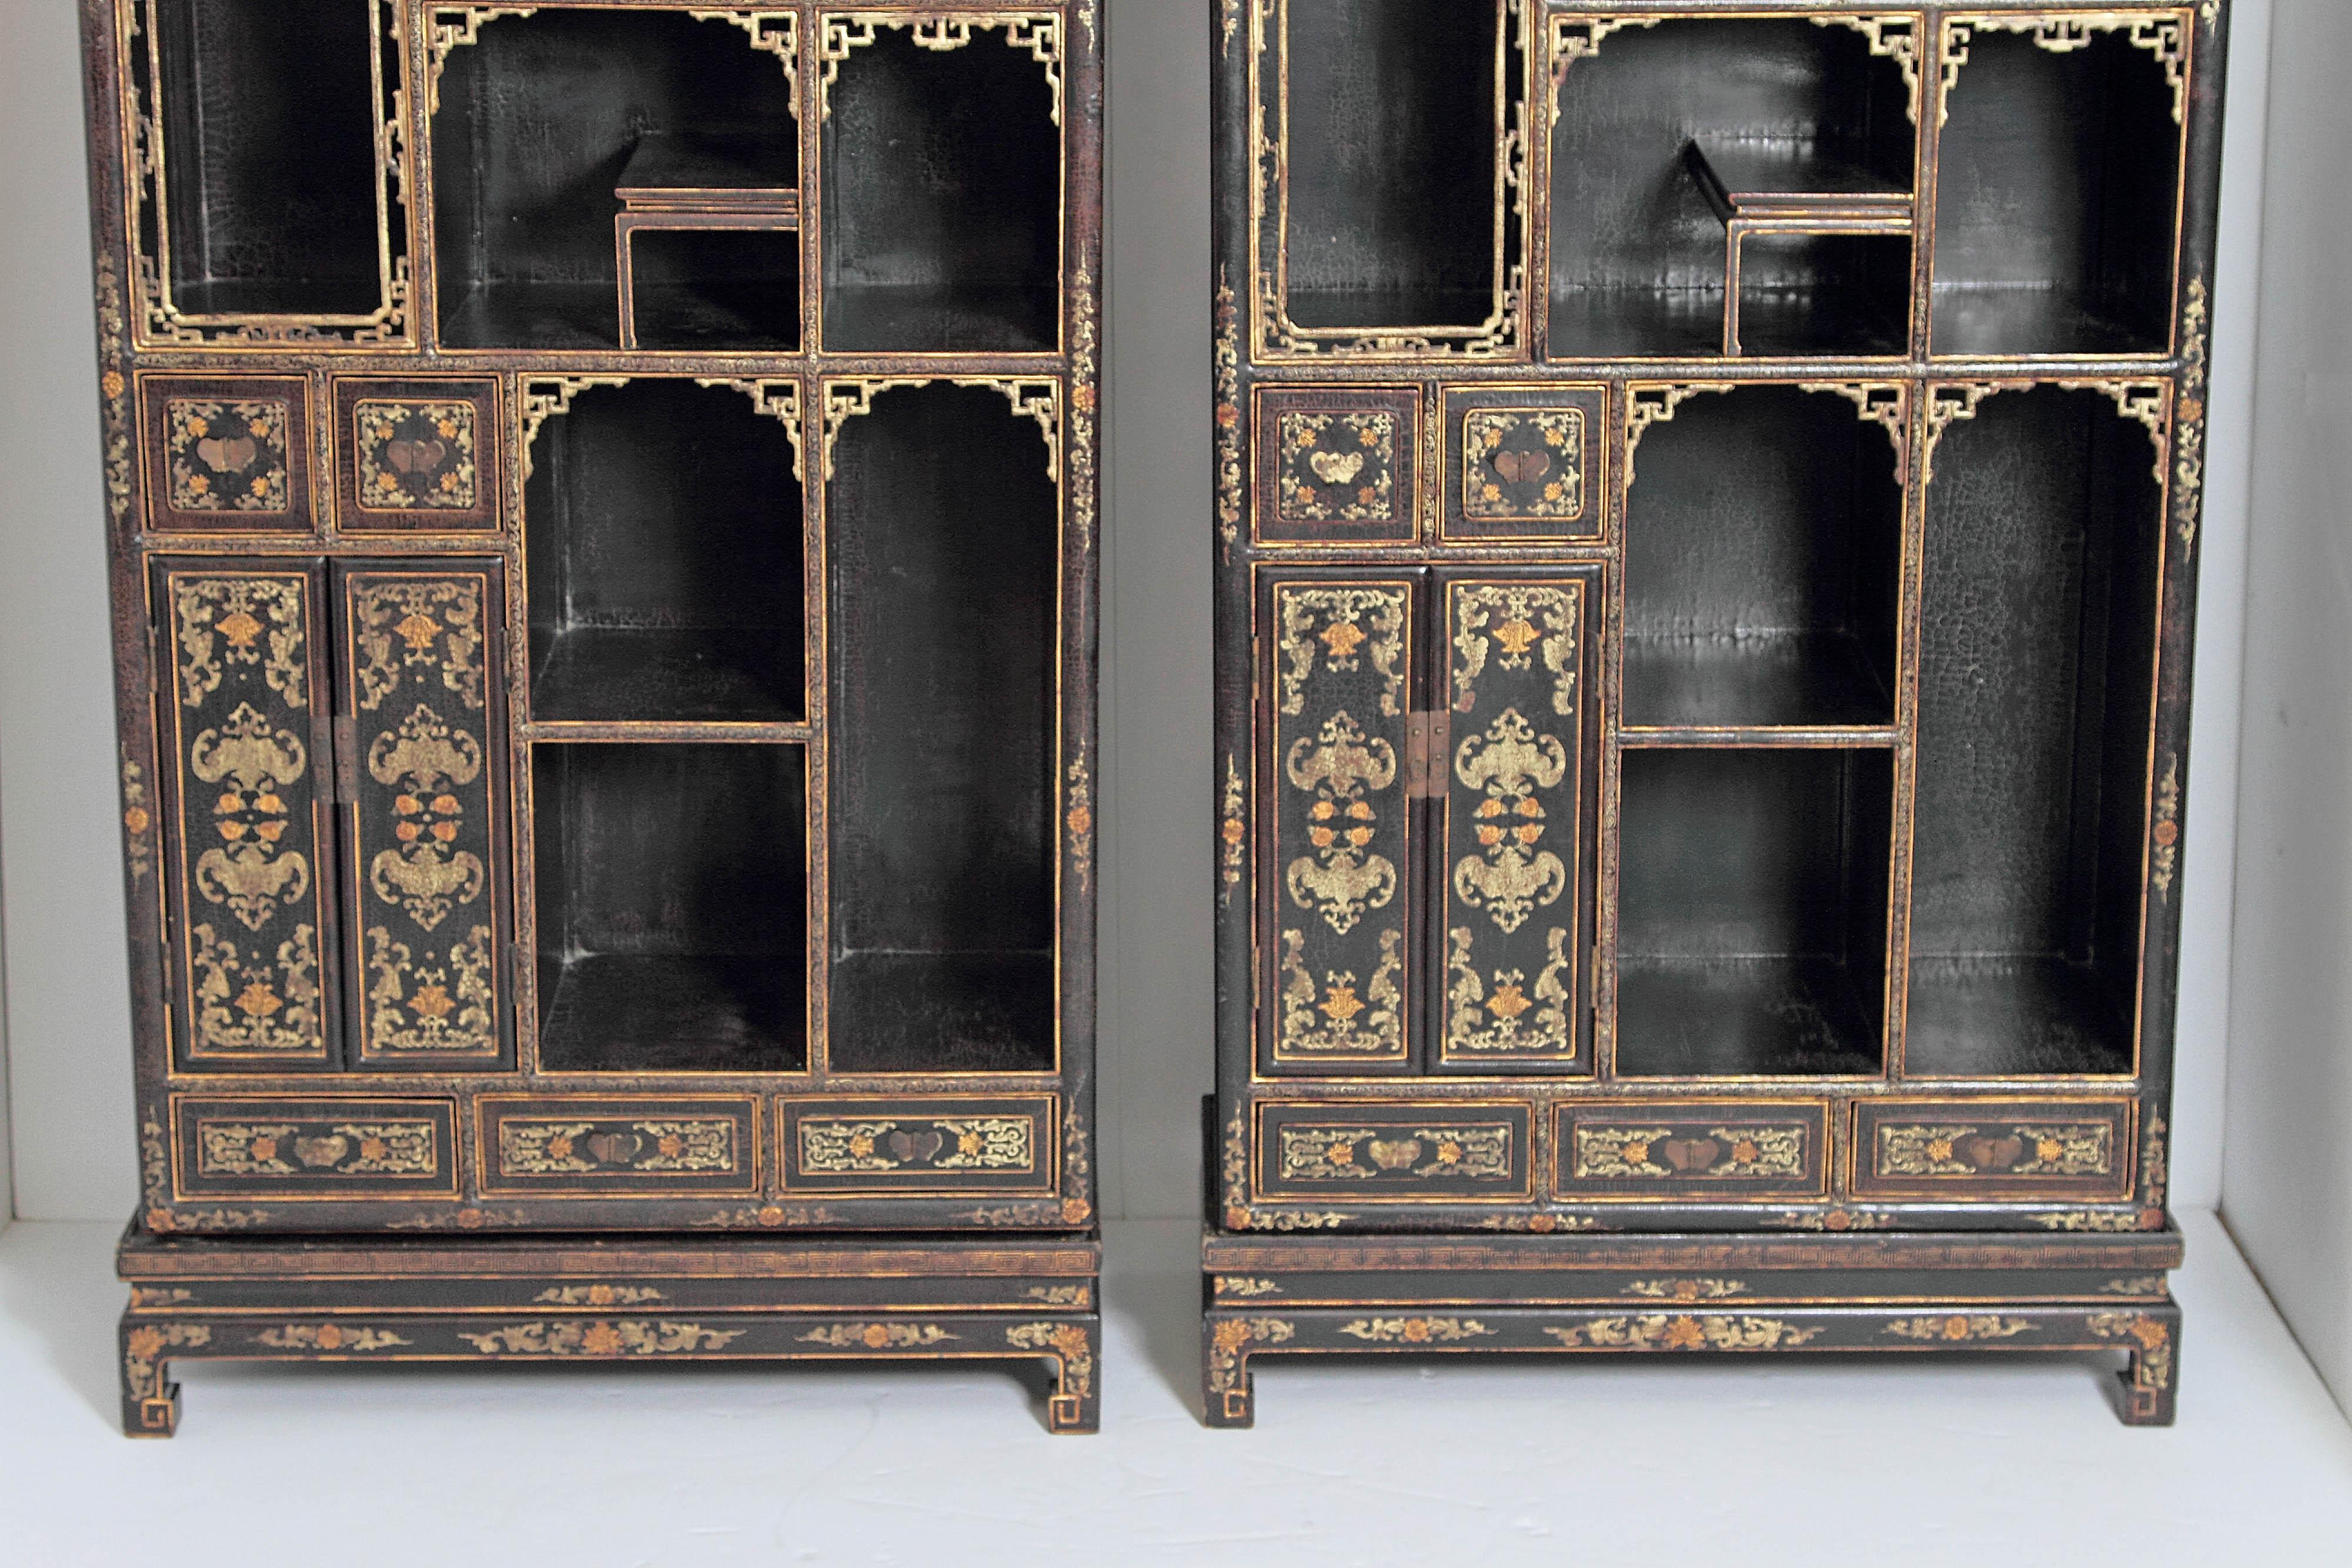 Pair of Chinese Black Lacquer Display Cabinets (Qing-Dynastie)